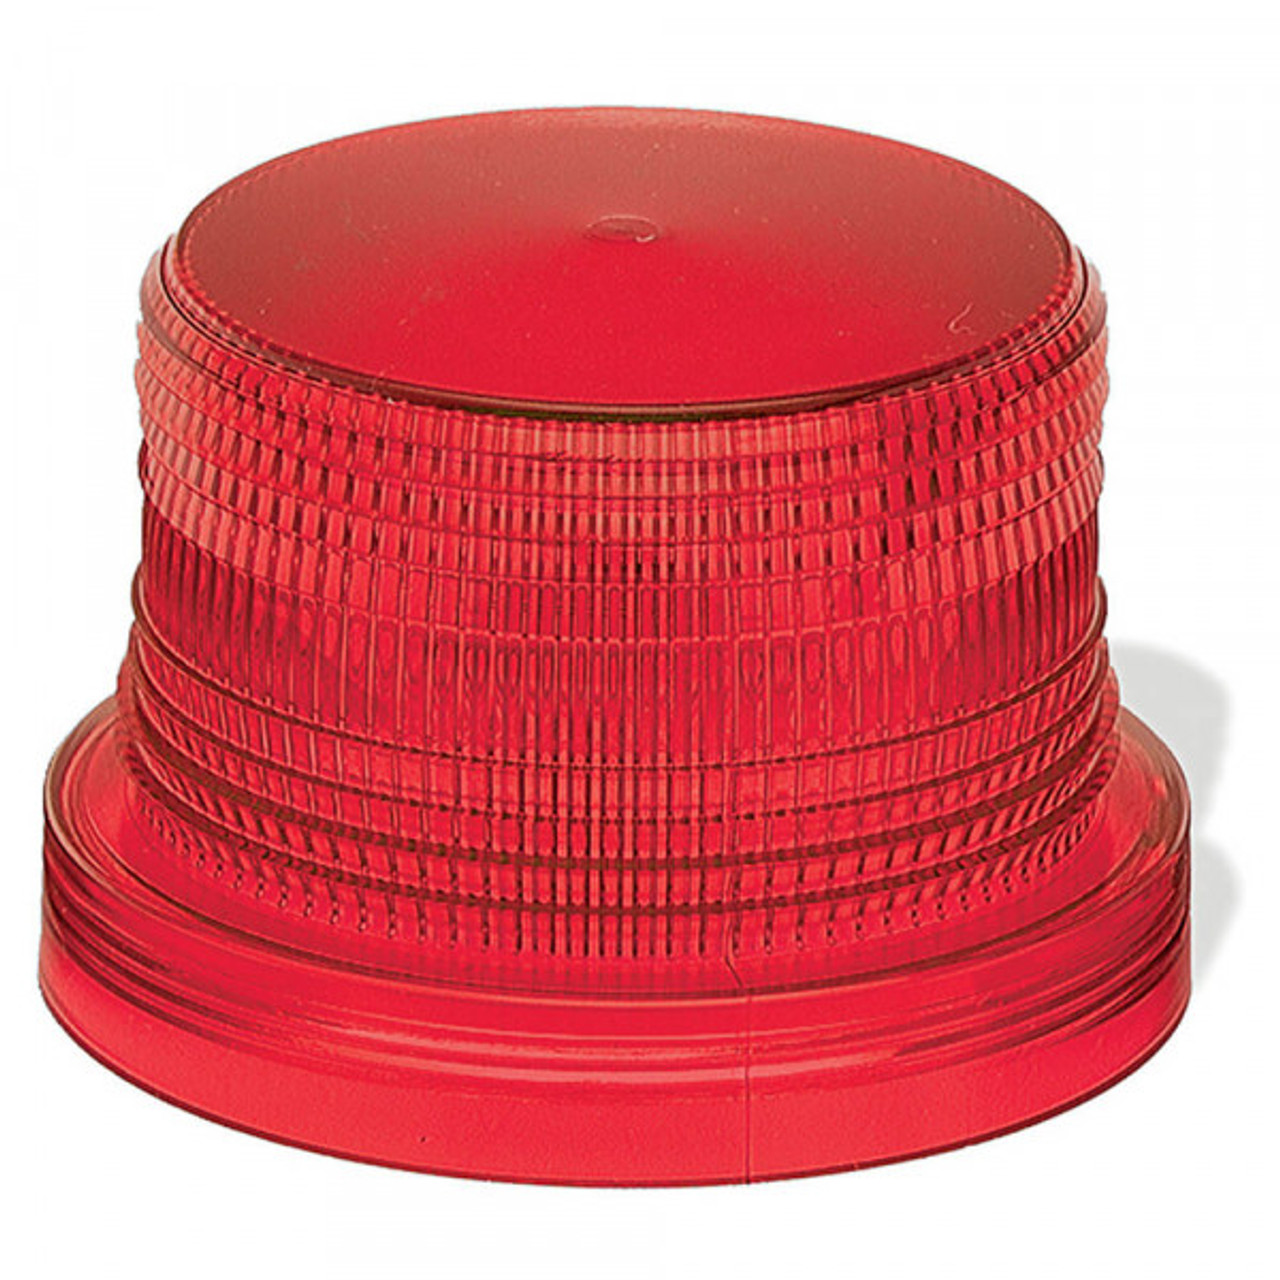 Mighty Mini Strobe Replacement Lens - Red  92032